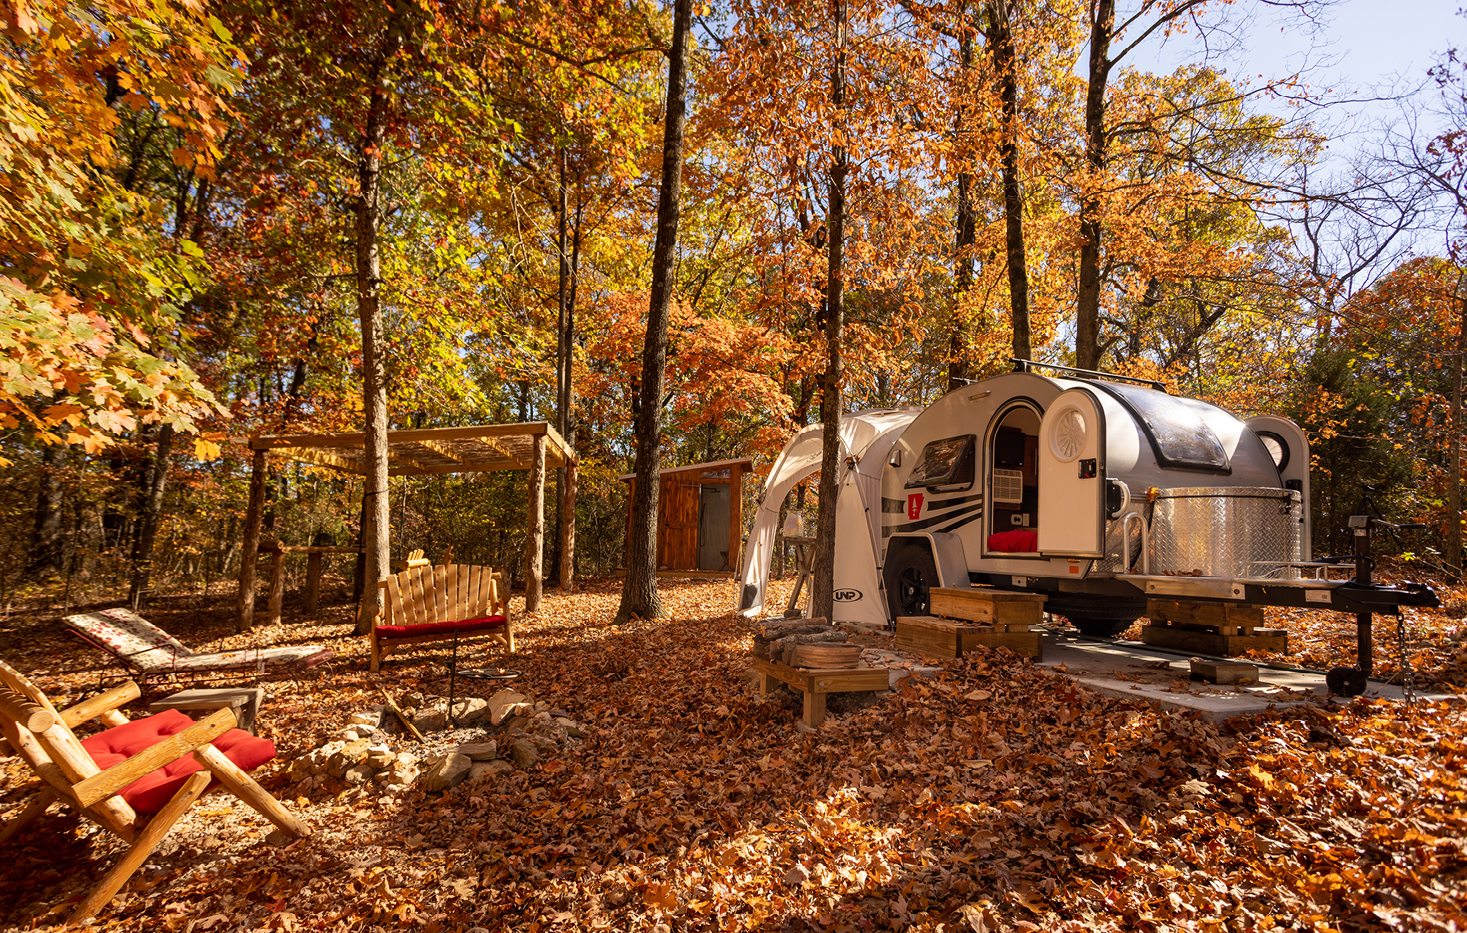 A silver airstream camper in a forest in the fall, surrounded by rich brown and orange leaves